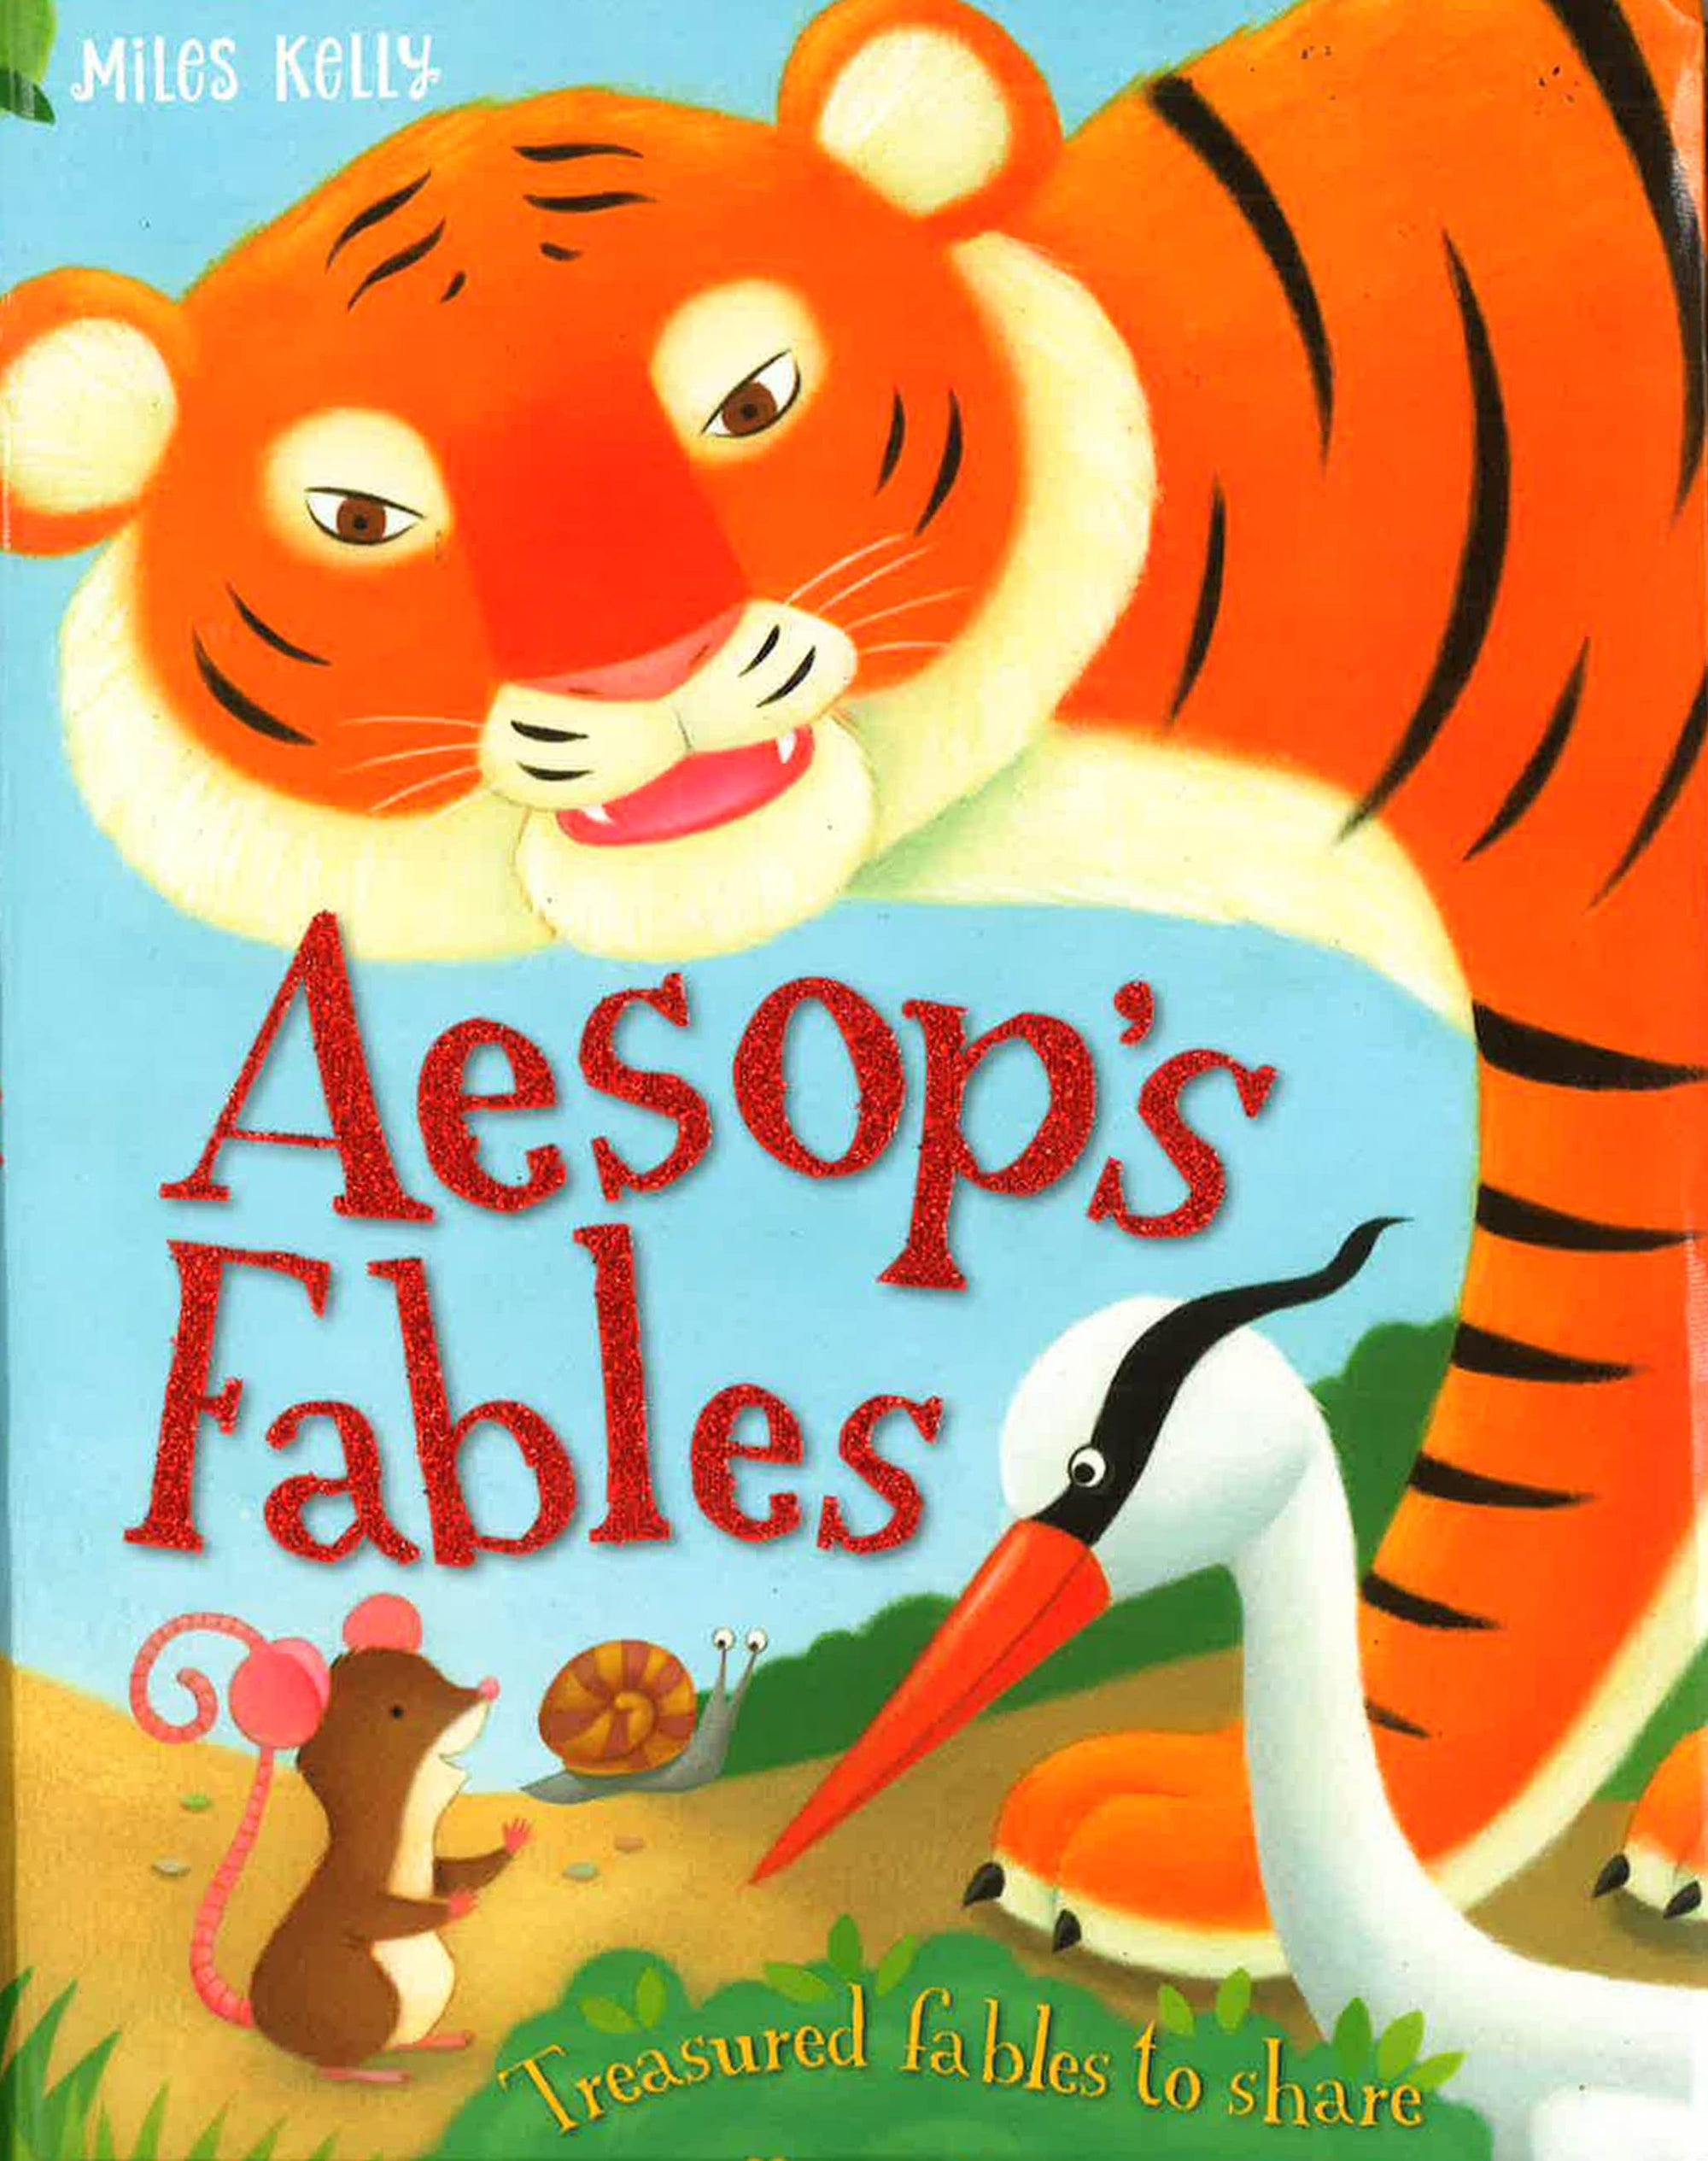 Aesop's Fables - Big Bad Wolf Books Sdn Bhd (Philippines)